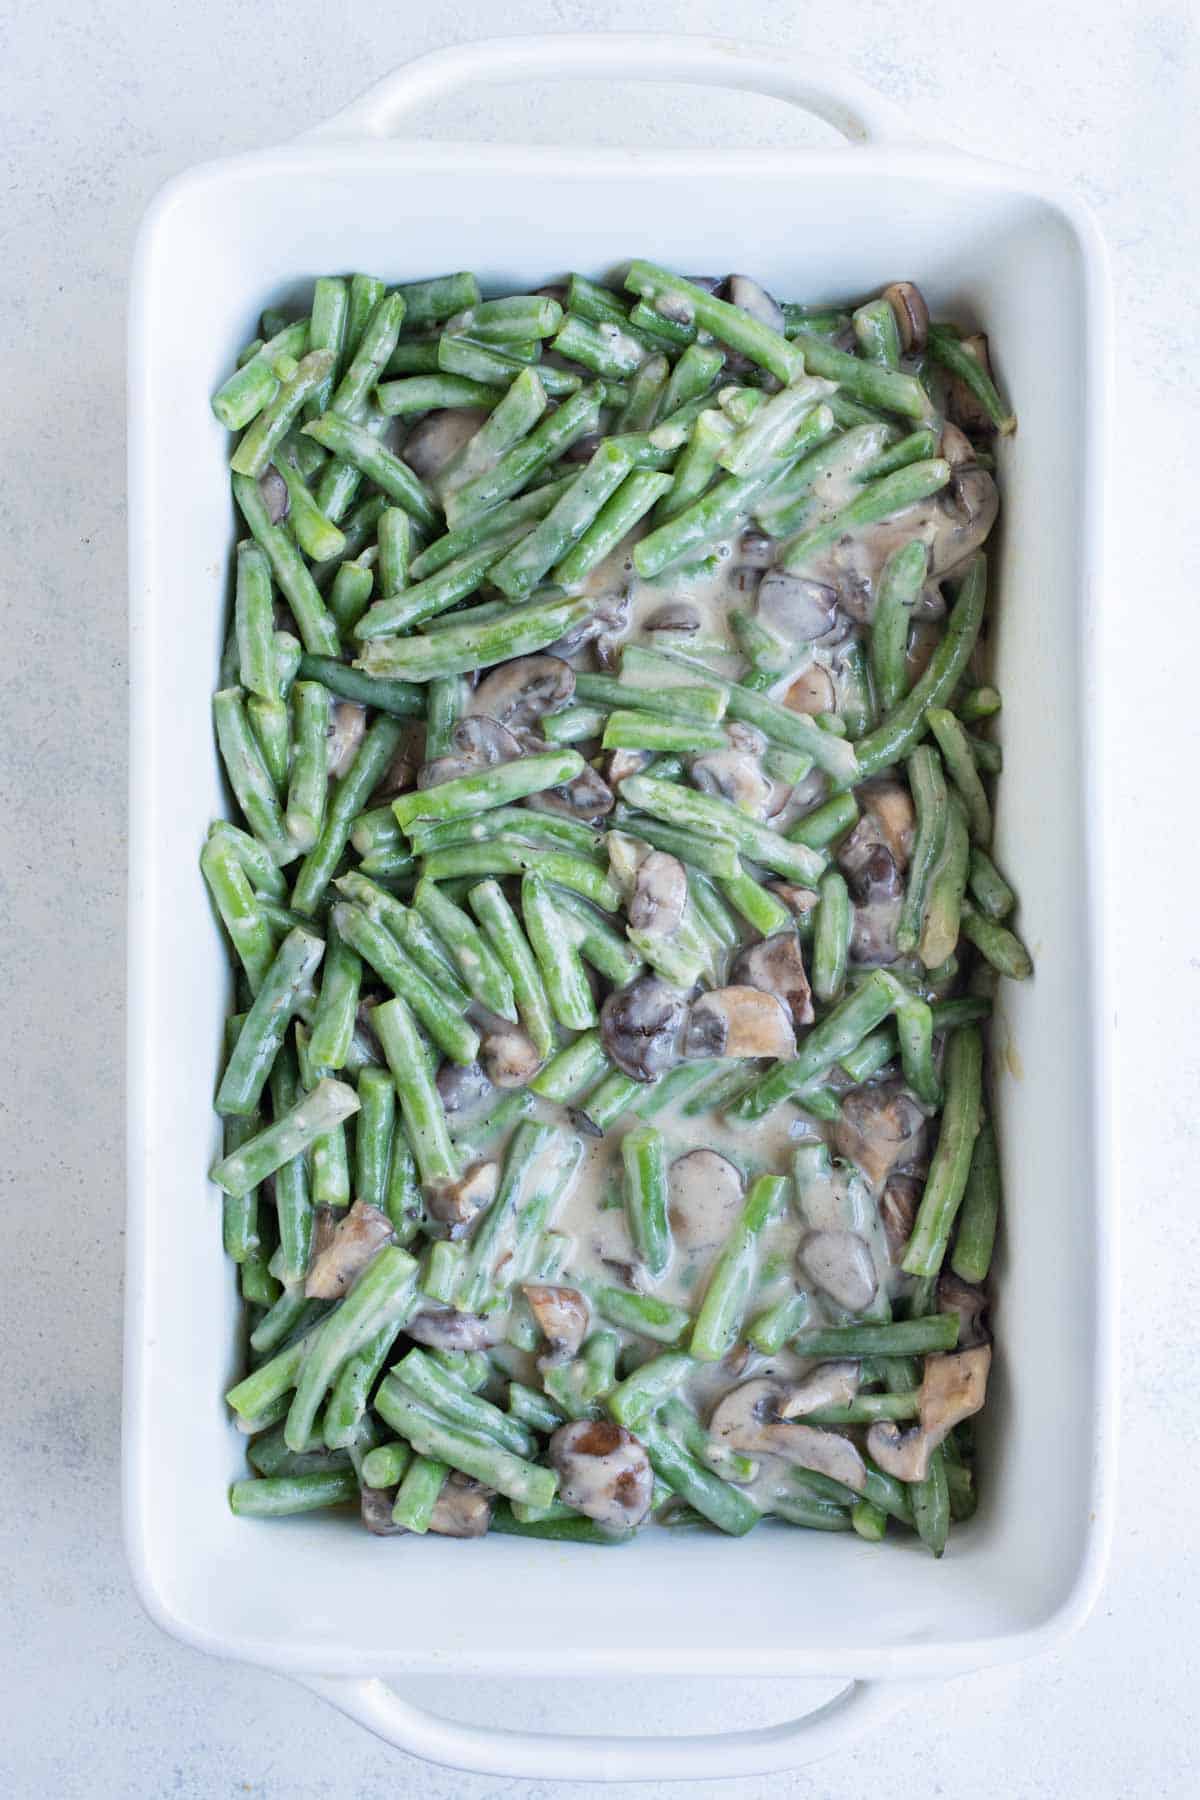 Green beans coated with homemade cream of mushroom soup.